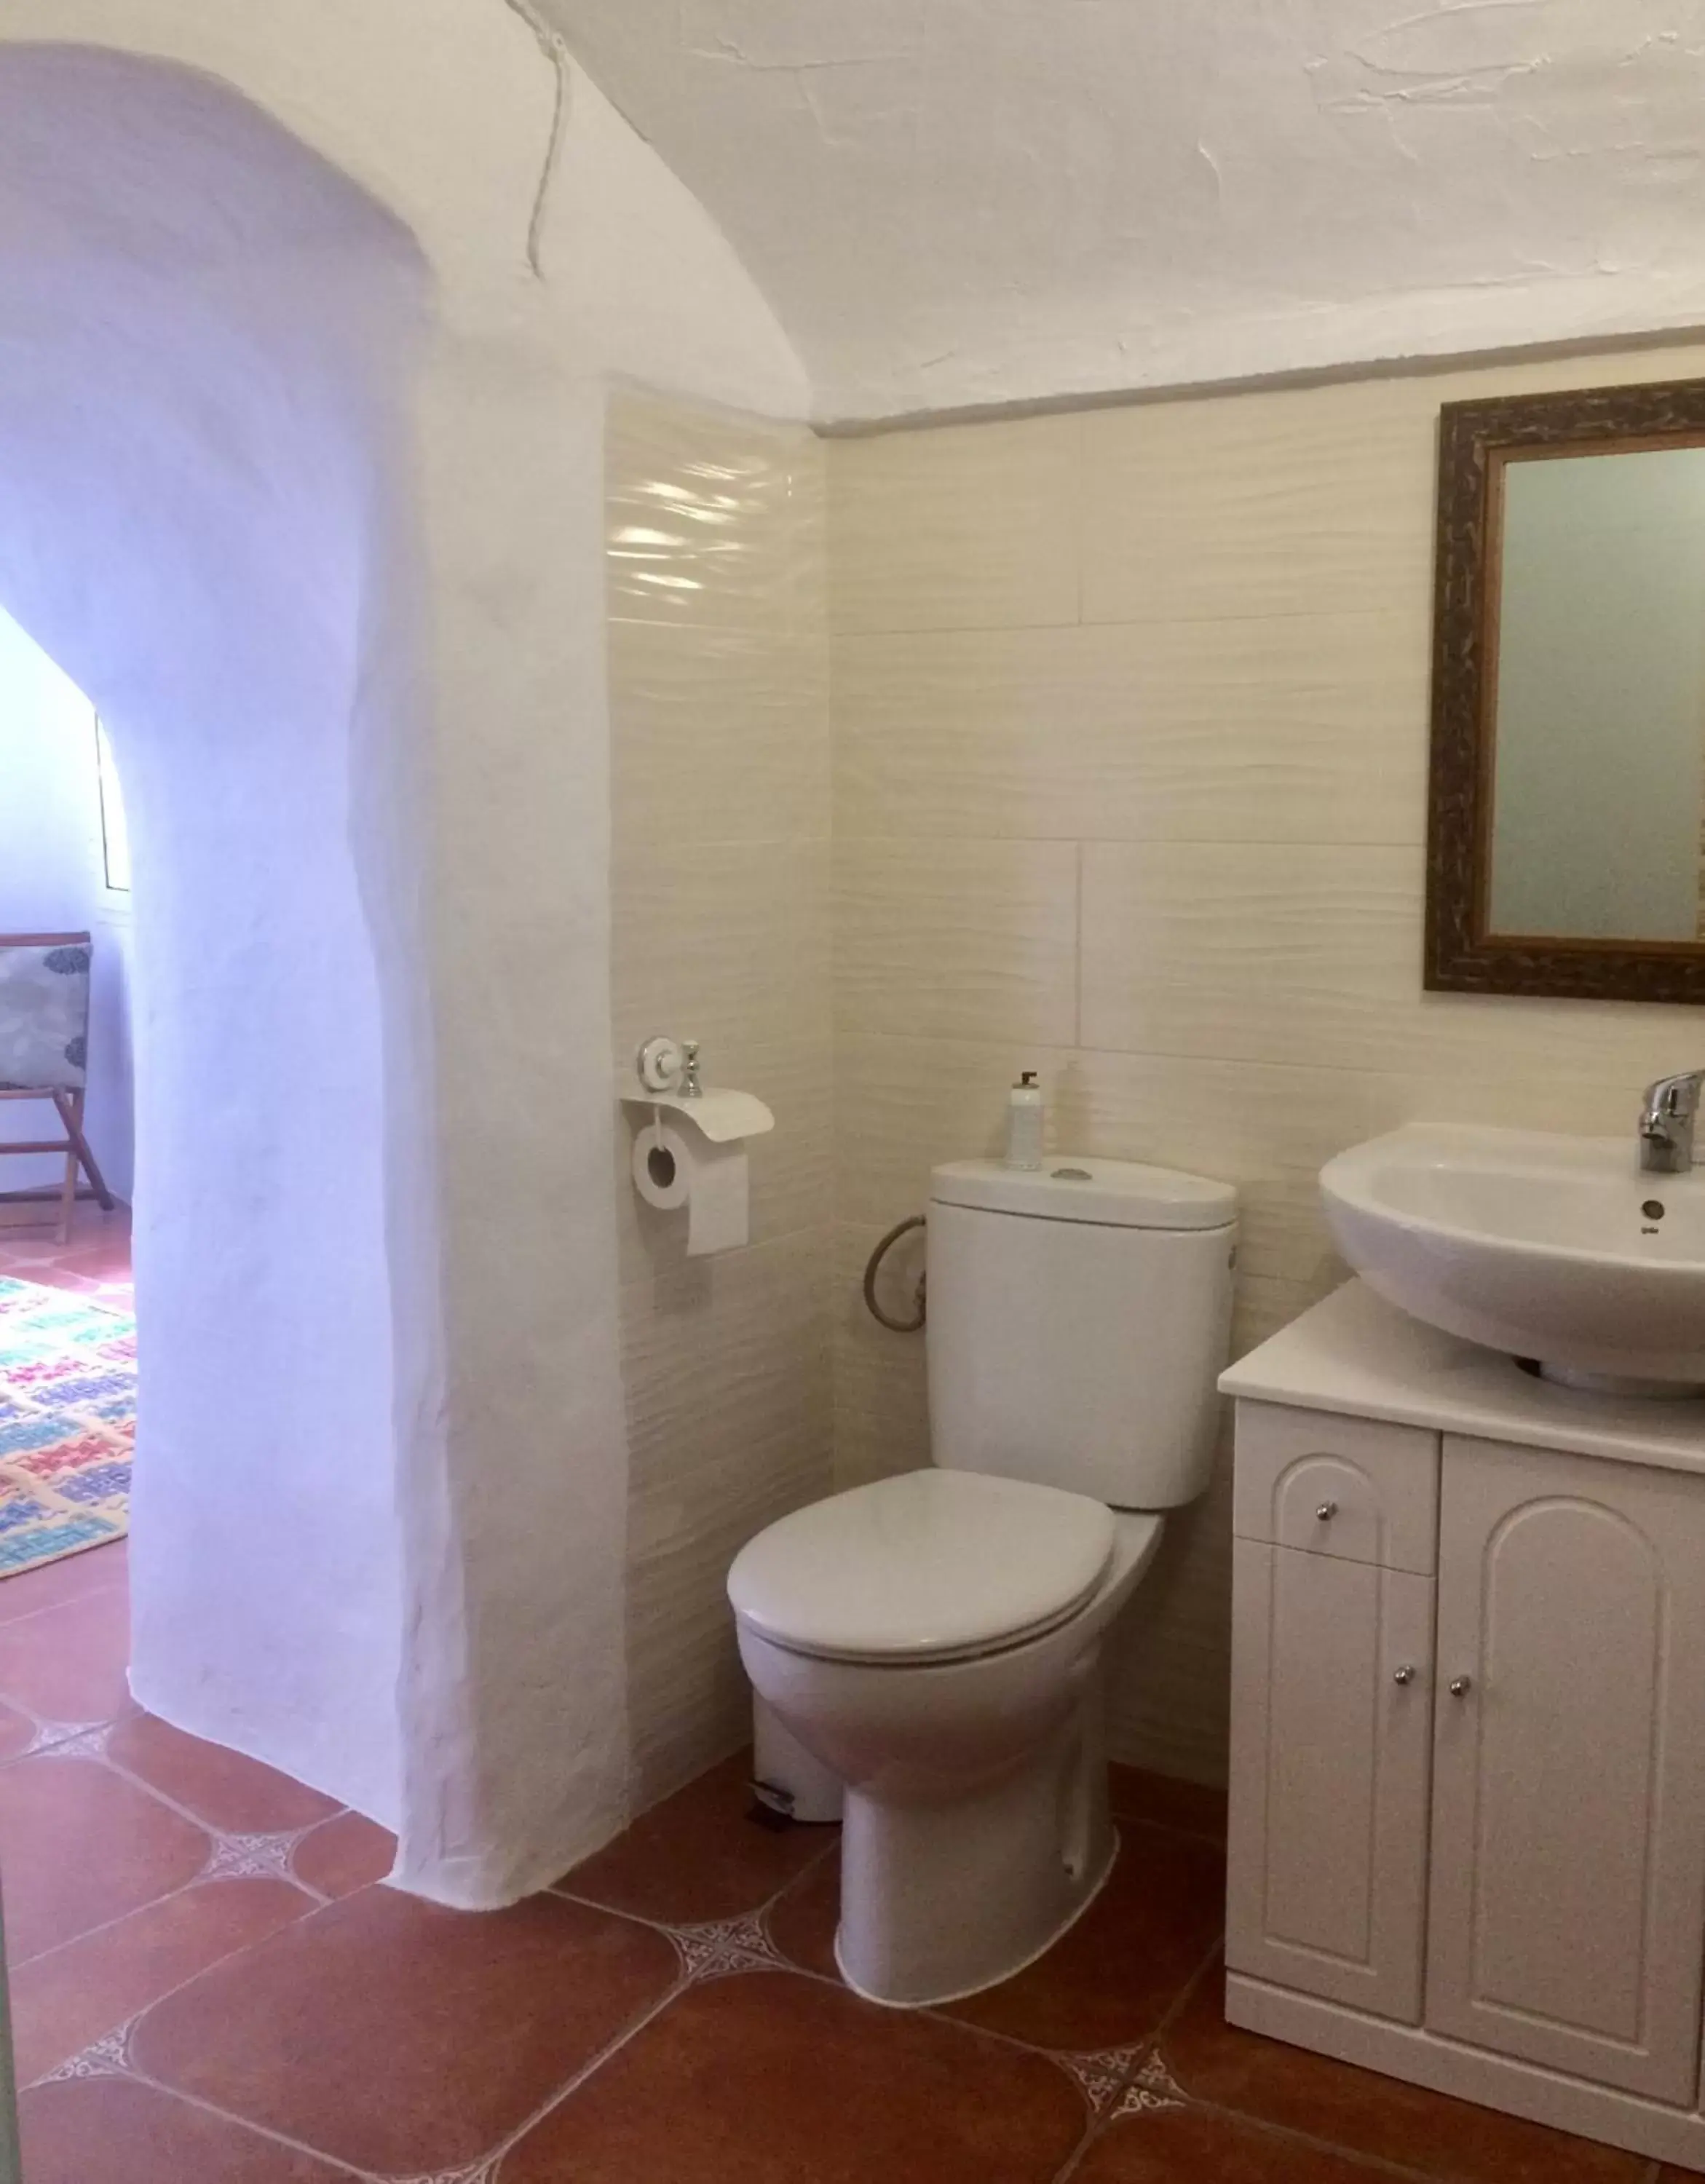 Bathroom in Cueva Romana, Adults Only Cave House